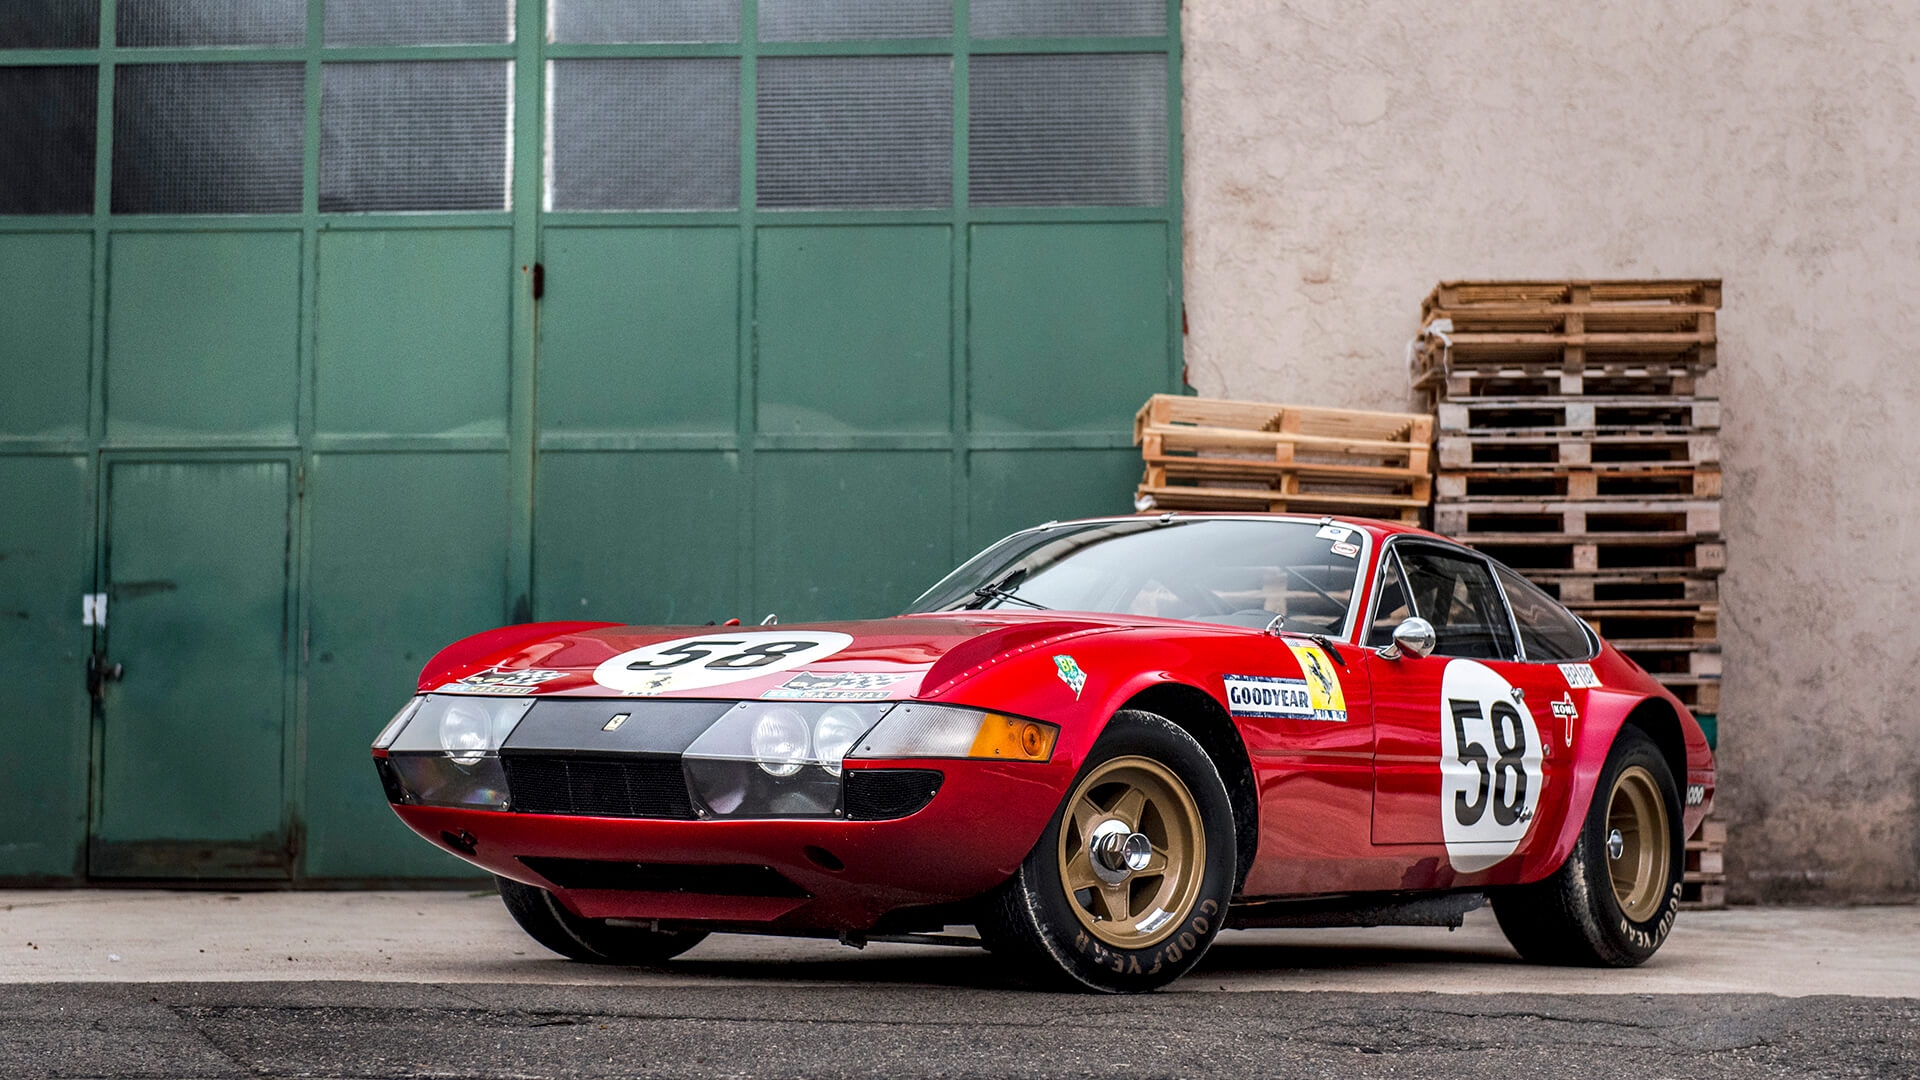 Third time lucky for ex-LM ‘Daytona’ at the Le Mans Classic sale?